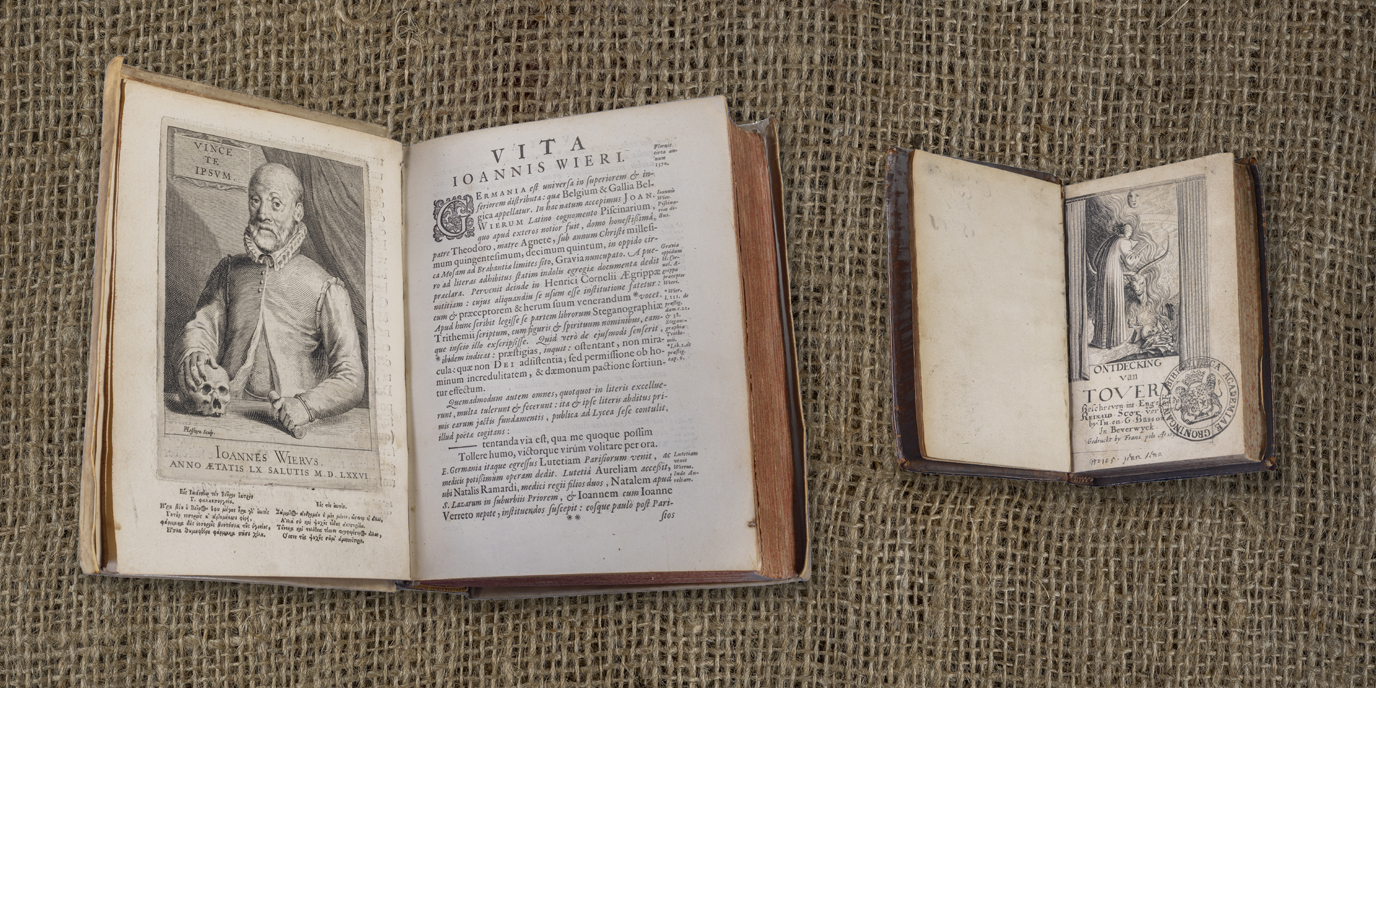 On the left we see the collected works of Johann Weyer (1660), on the right a Dutch copy of Reginald Scot’s 'The Dicovery of Witchcrafte' (1638). These works deny that witches exist and are critical of witch prosecutions.